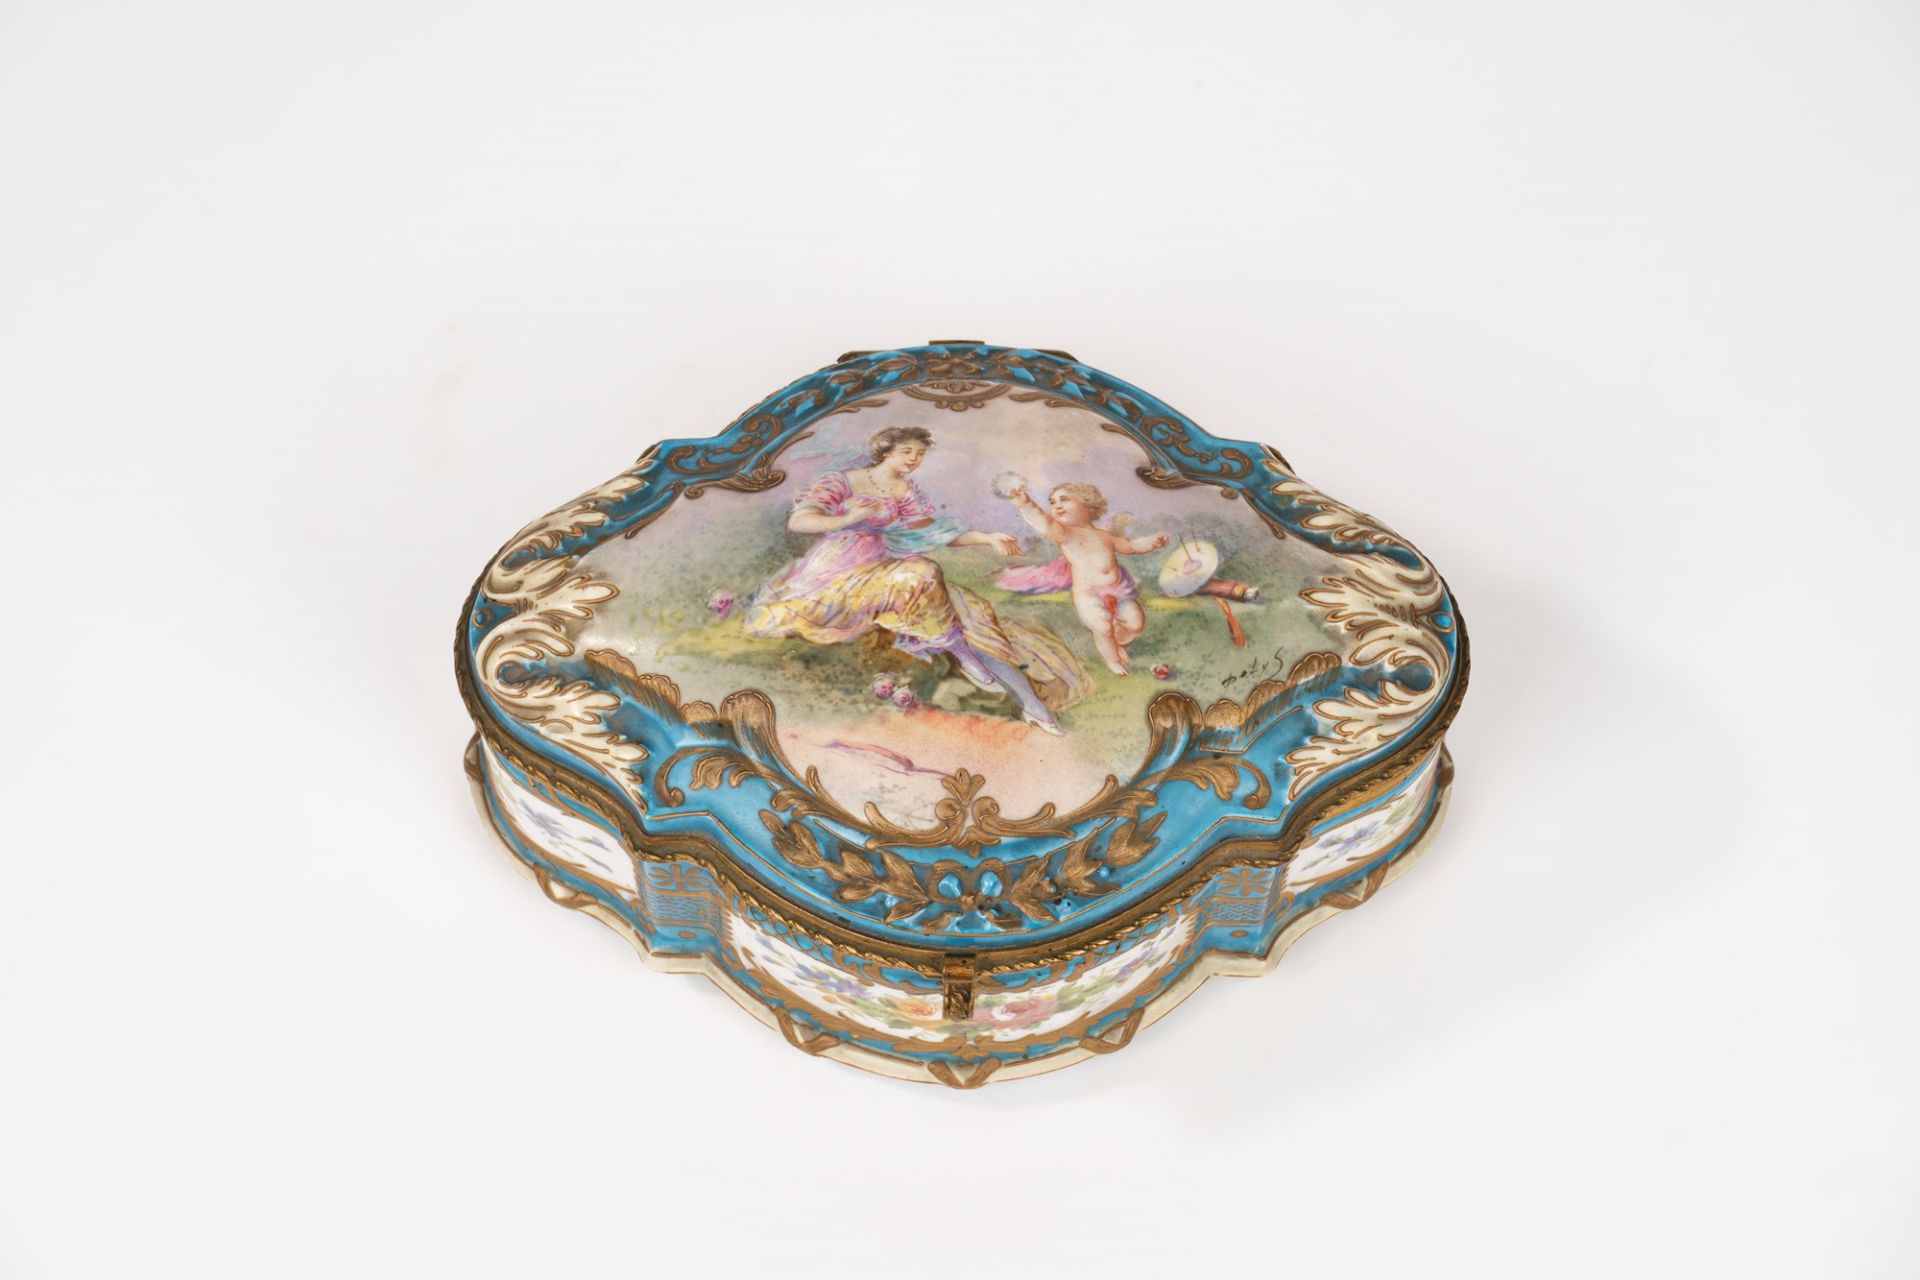 Polychrome porcelain box with gilded bronze finishes, Sevres manufacture, late 19th century